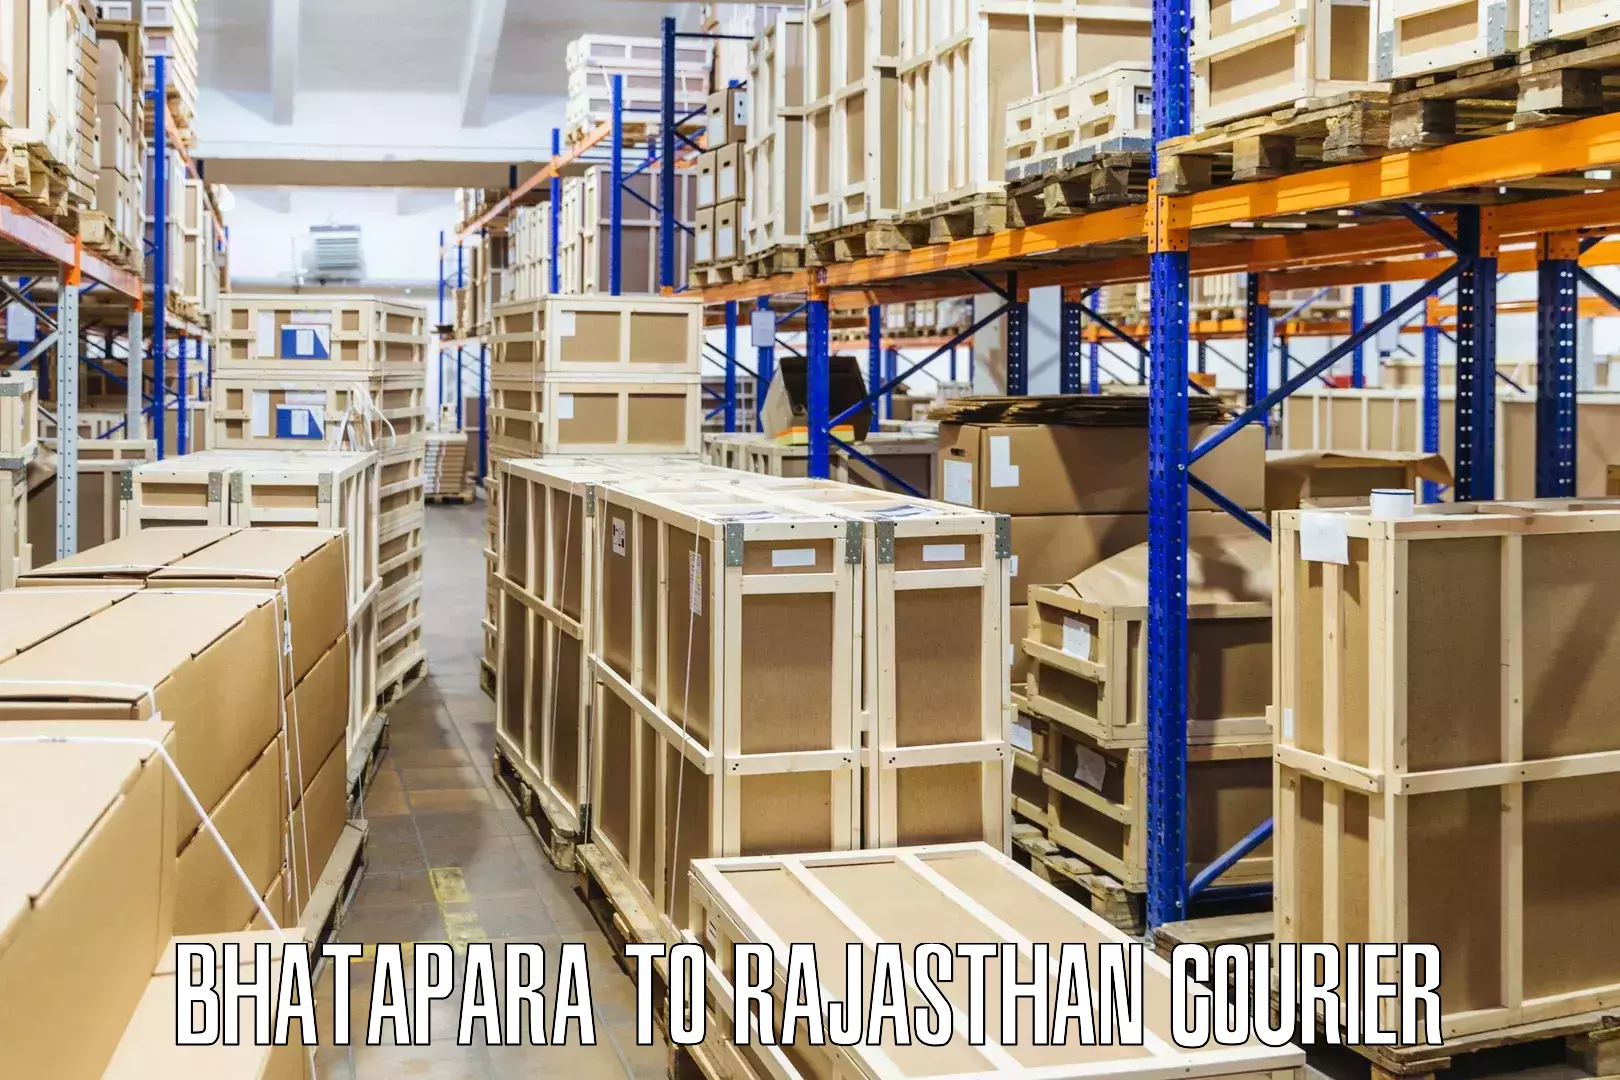 Nationwide parcel services Bhatapara to Pilani